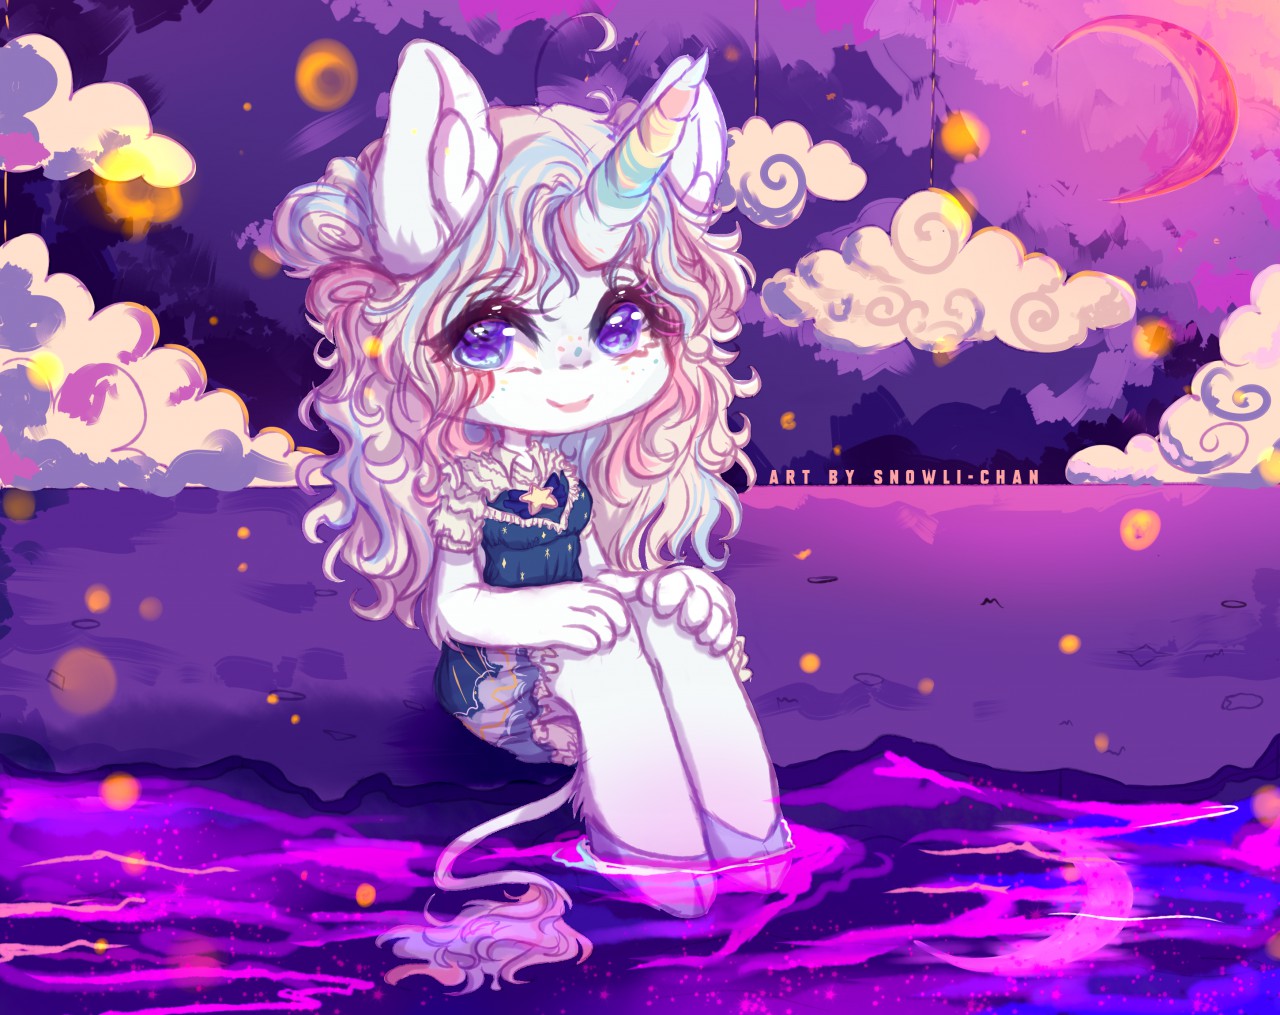 PNGTUBER Cute Candy Unicorn Girl / Ready to Use PNGTUBER / Premade PNGTUBER  /anime Avatar for Twitch /discord /youtube/ Tiktok / Purple - Etsy